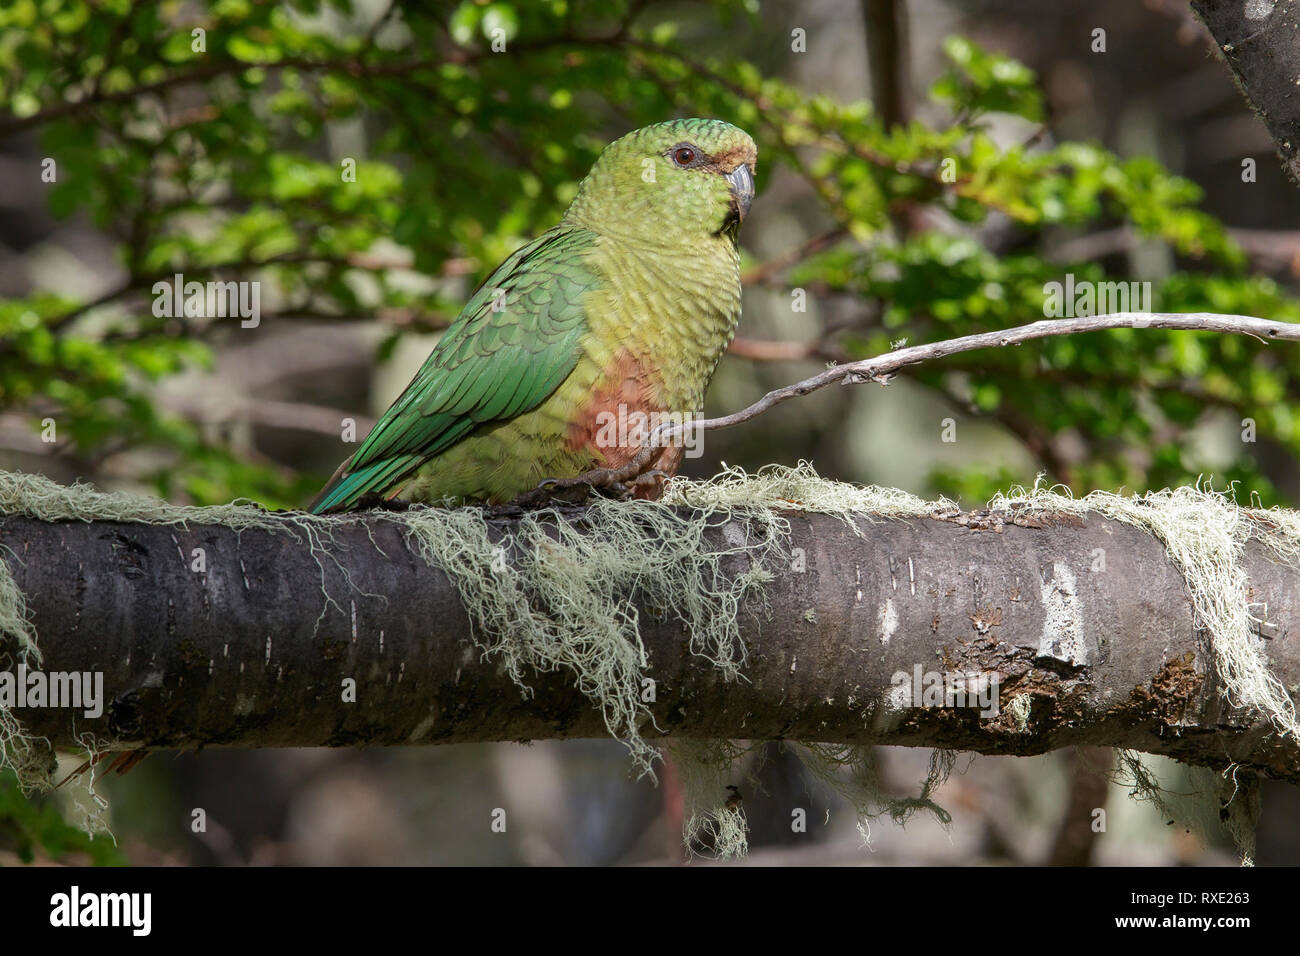 Austral Parakeet (Enicognathus ferrugineus) perched on a branch in Chile. Stock Photo